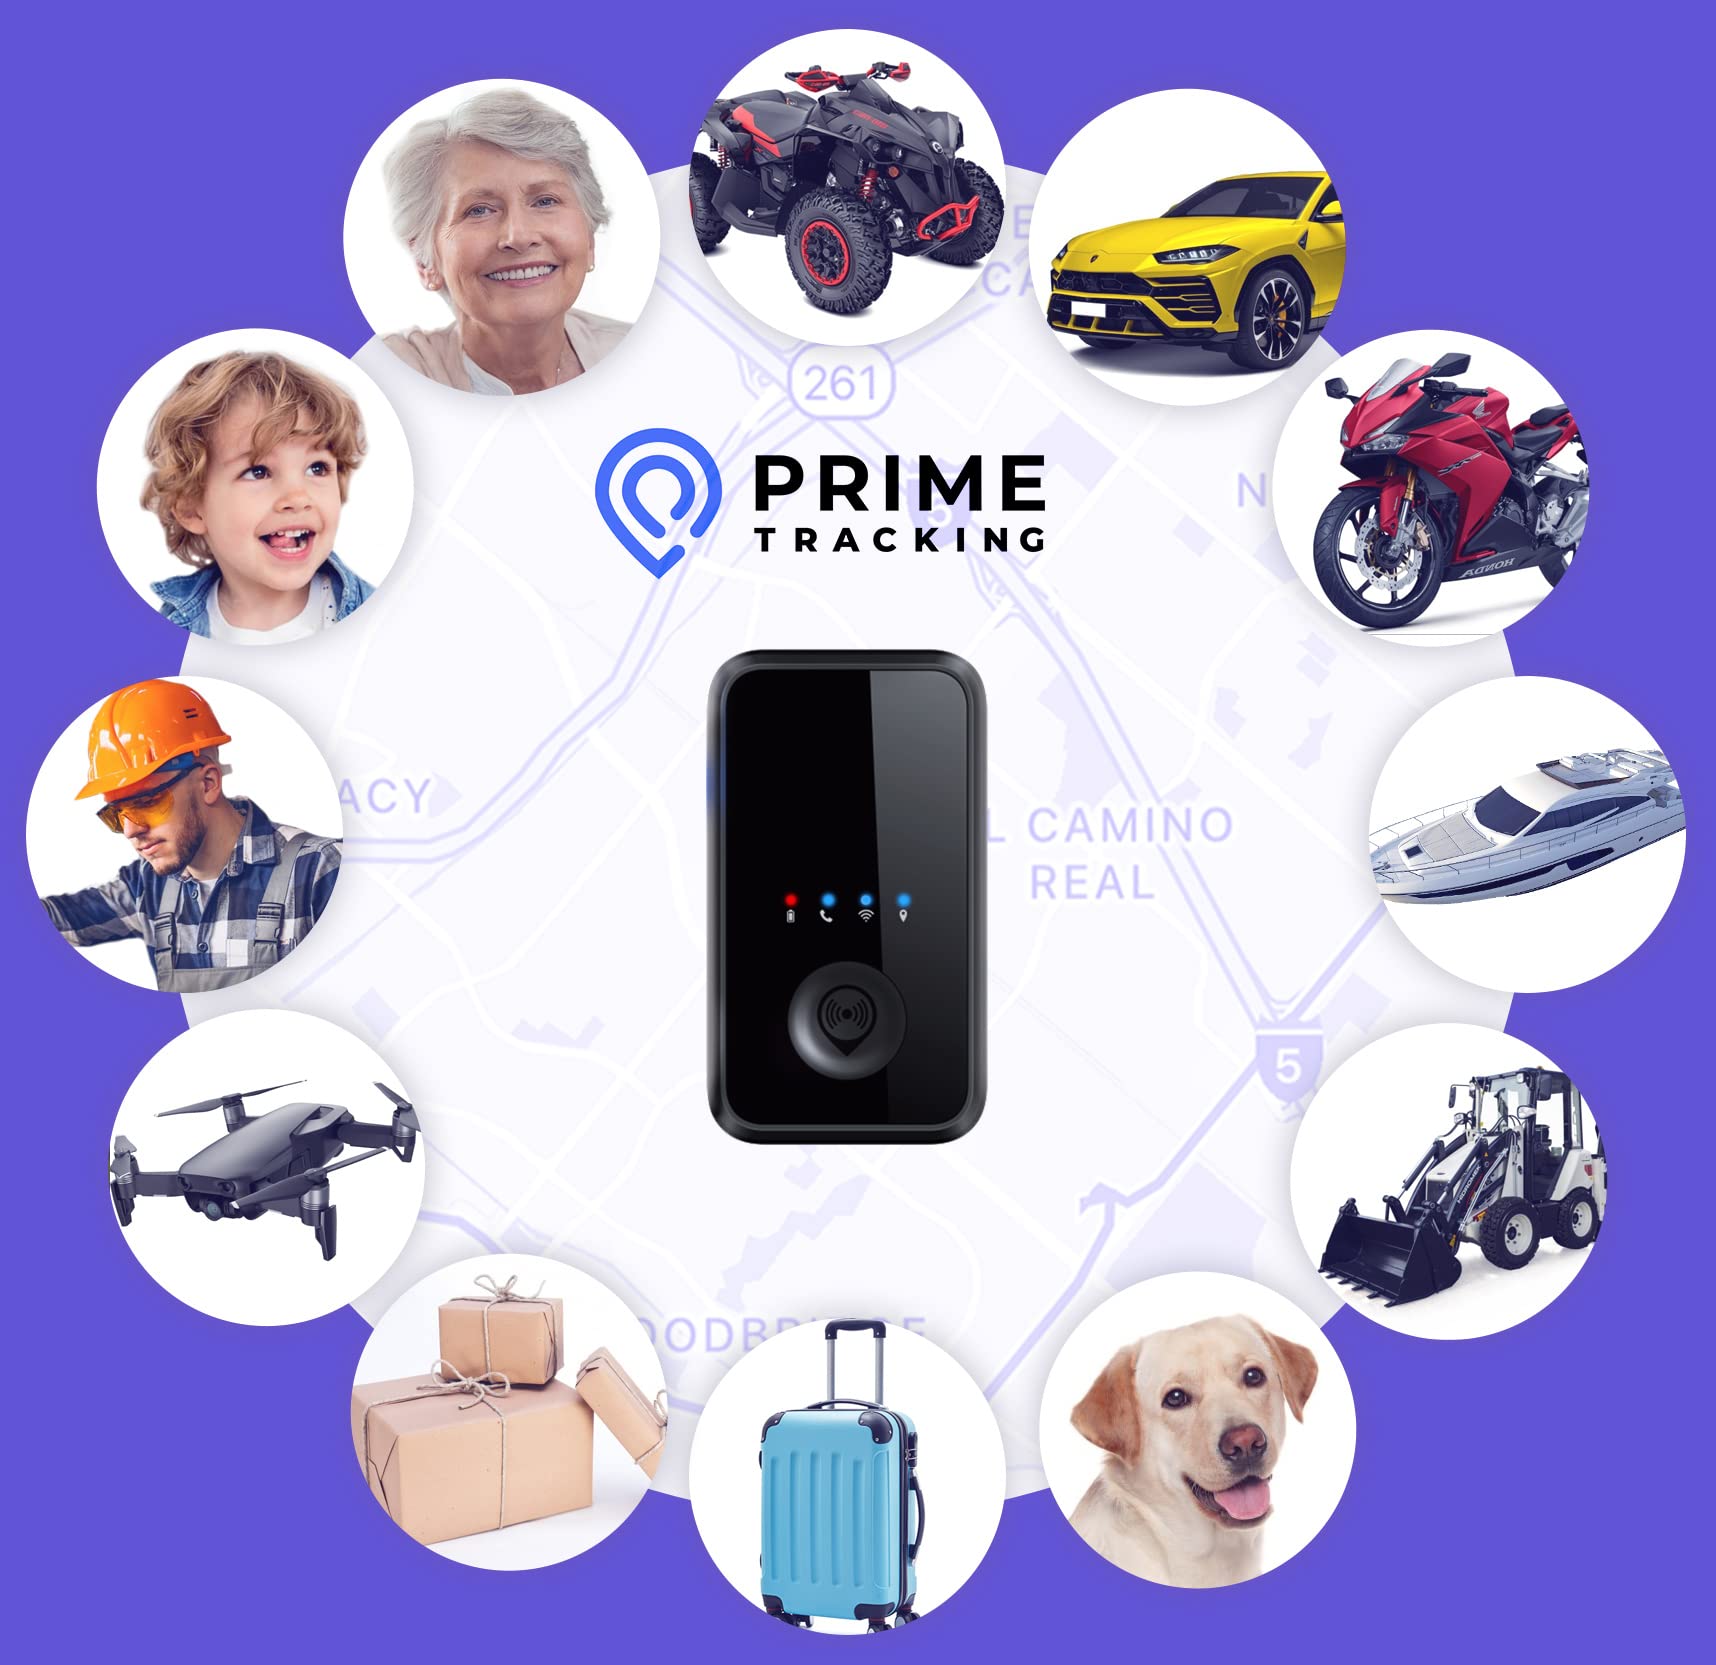 PrimeTracking Pro GPS Tracker for Vehicles, [Unlimited Distance] GPS Tracker for Kids, Car GPS Tracker, [Real-Time & Instant Alerts] Mini GPS Tracker, 4G LTE, SOS Button, Subscription Required(1 Pack)